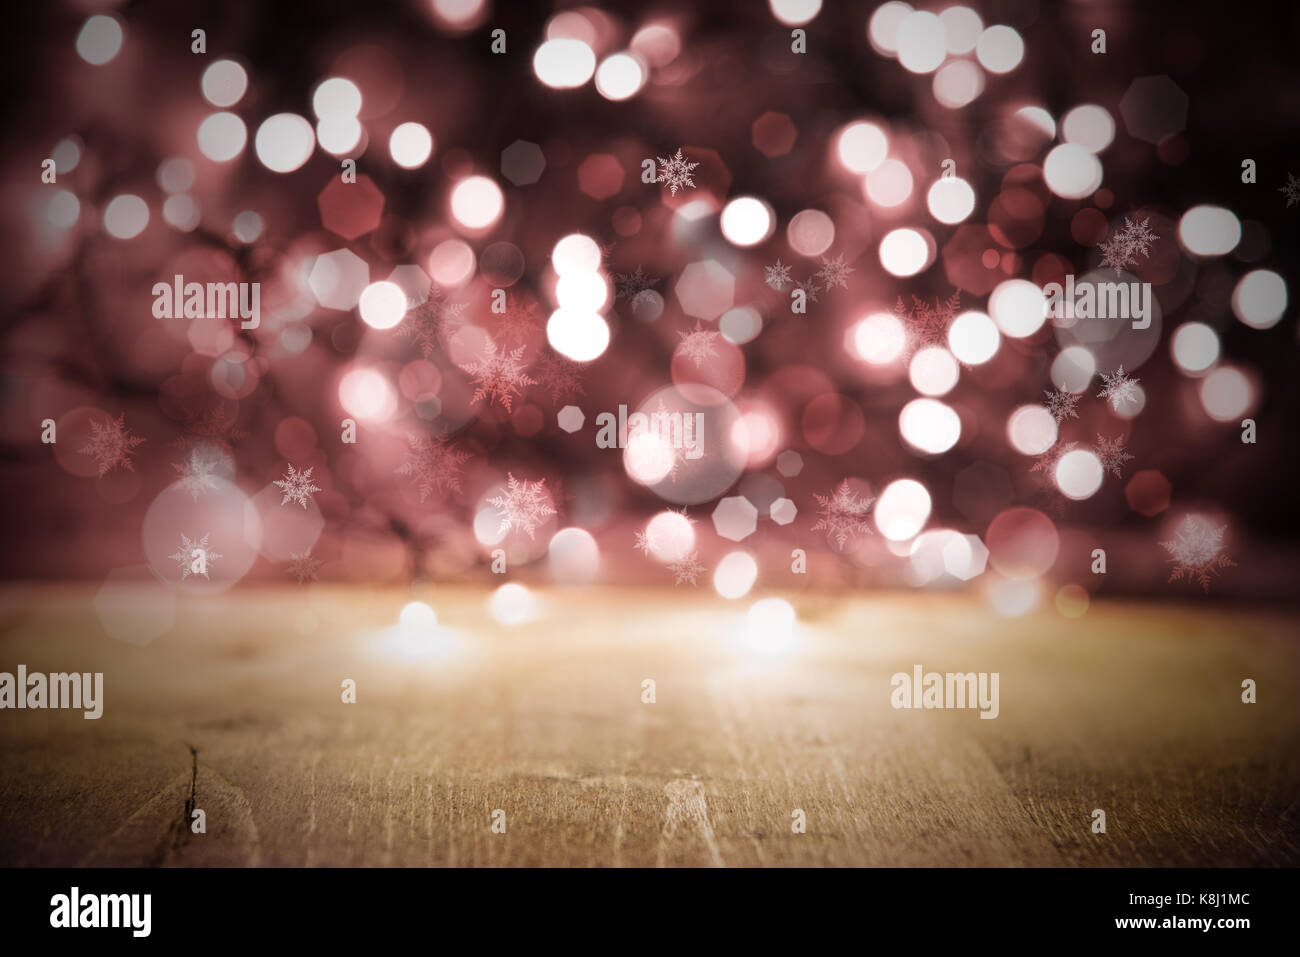 Pink Christmas Lights Background, Party Or Celebration Texture With Wood Stock Photo